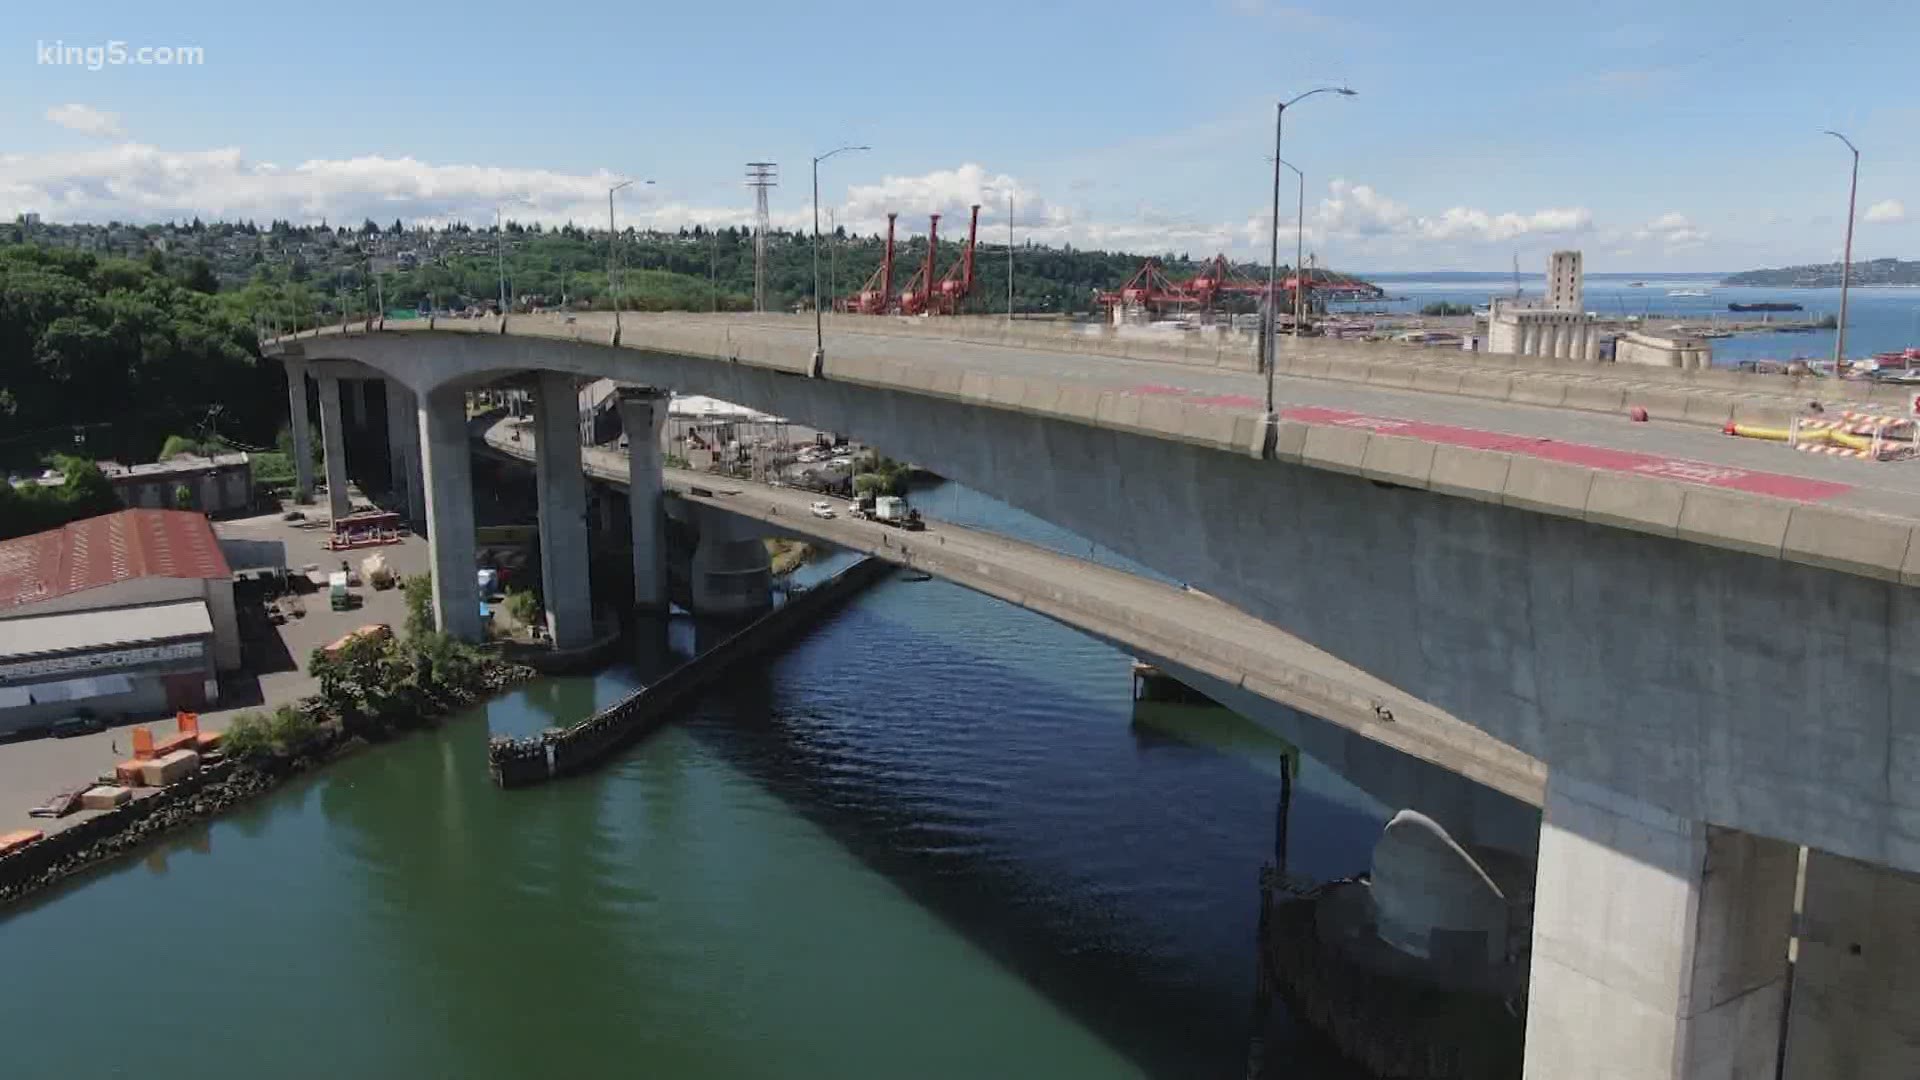 Washington’s Congressional delegation is exploring ways the federal government might help pay for bridge repairs or replacement.